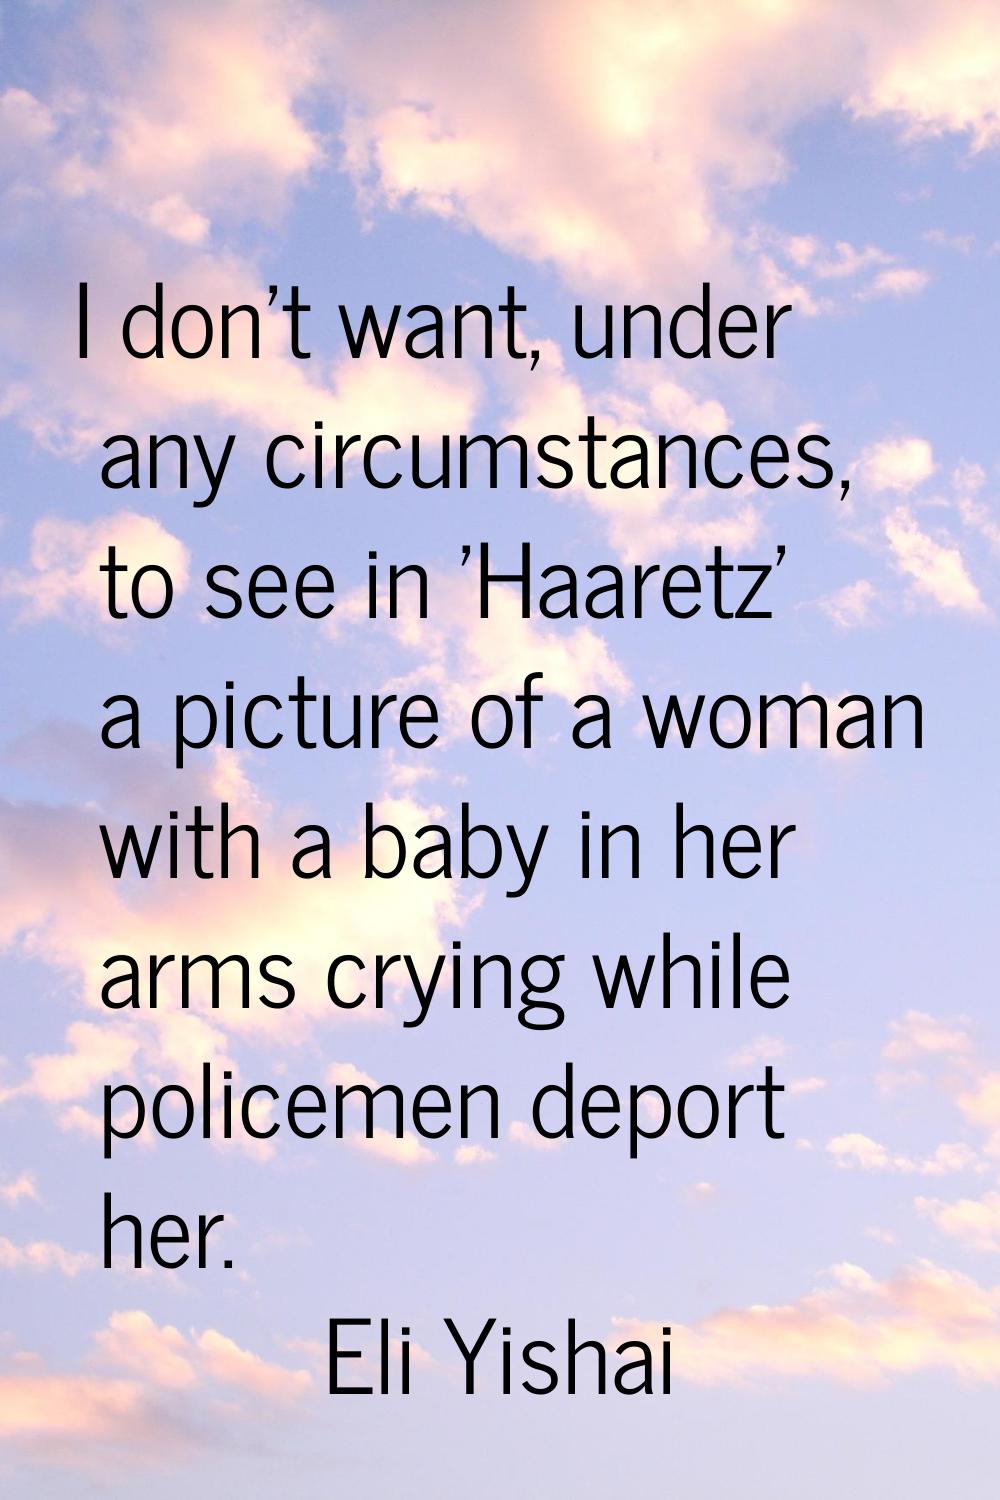 I don't want, under any circumstances, to see in 'Haaretz' a picture of a woman with a baby in her 